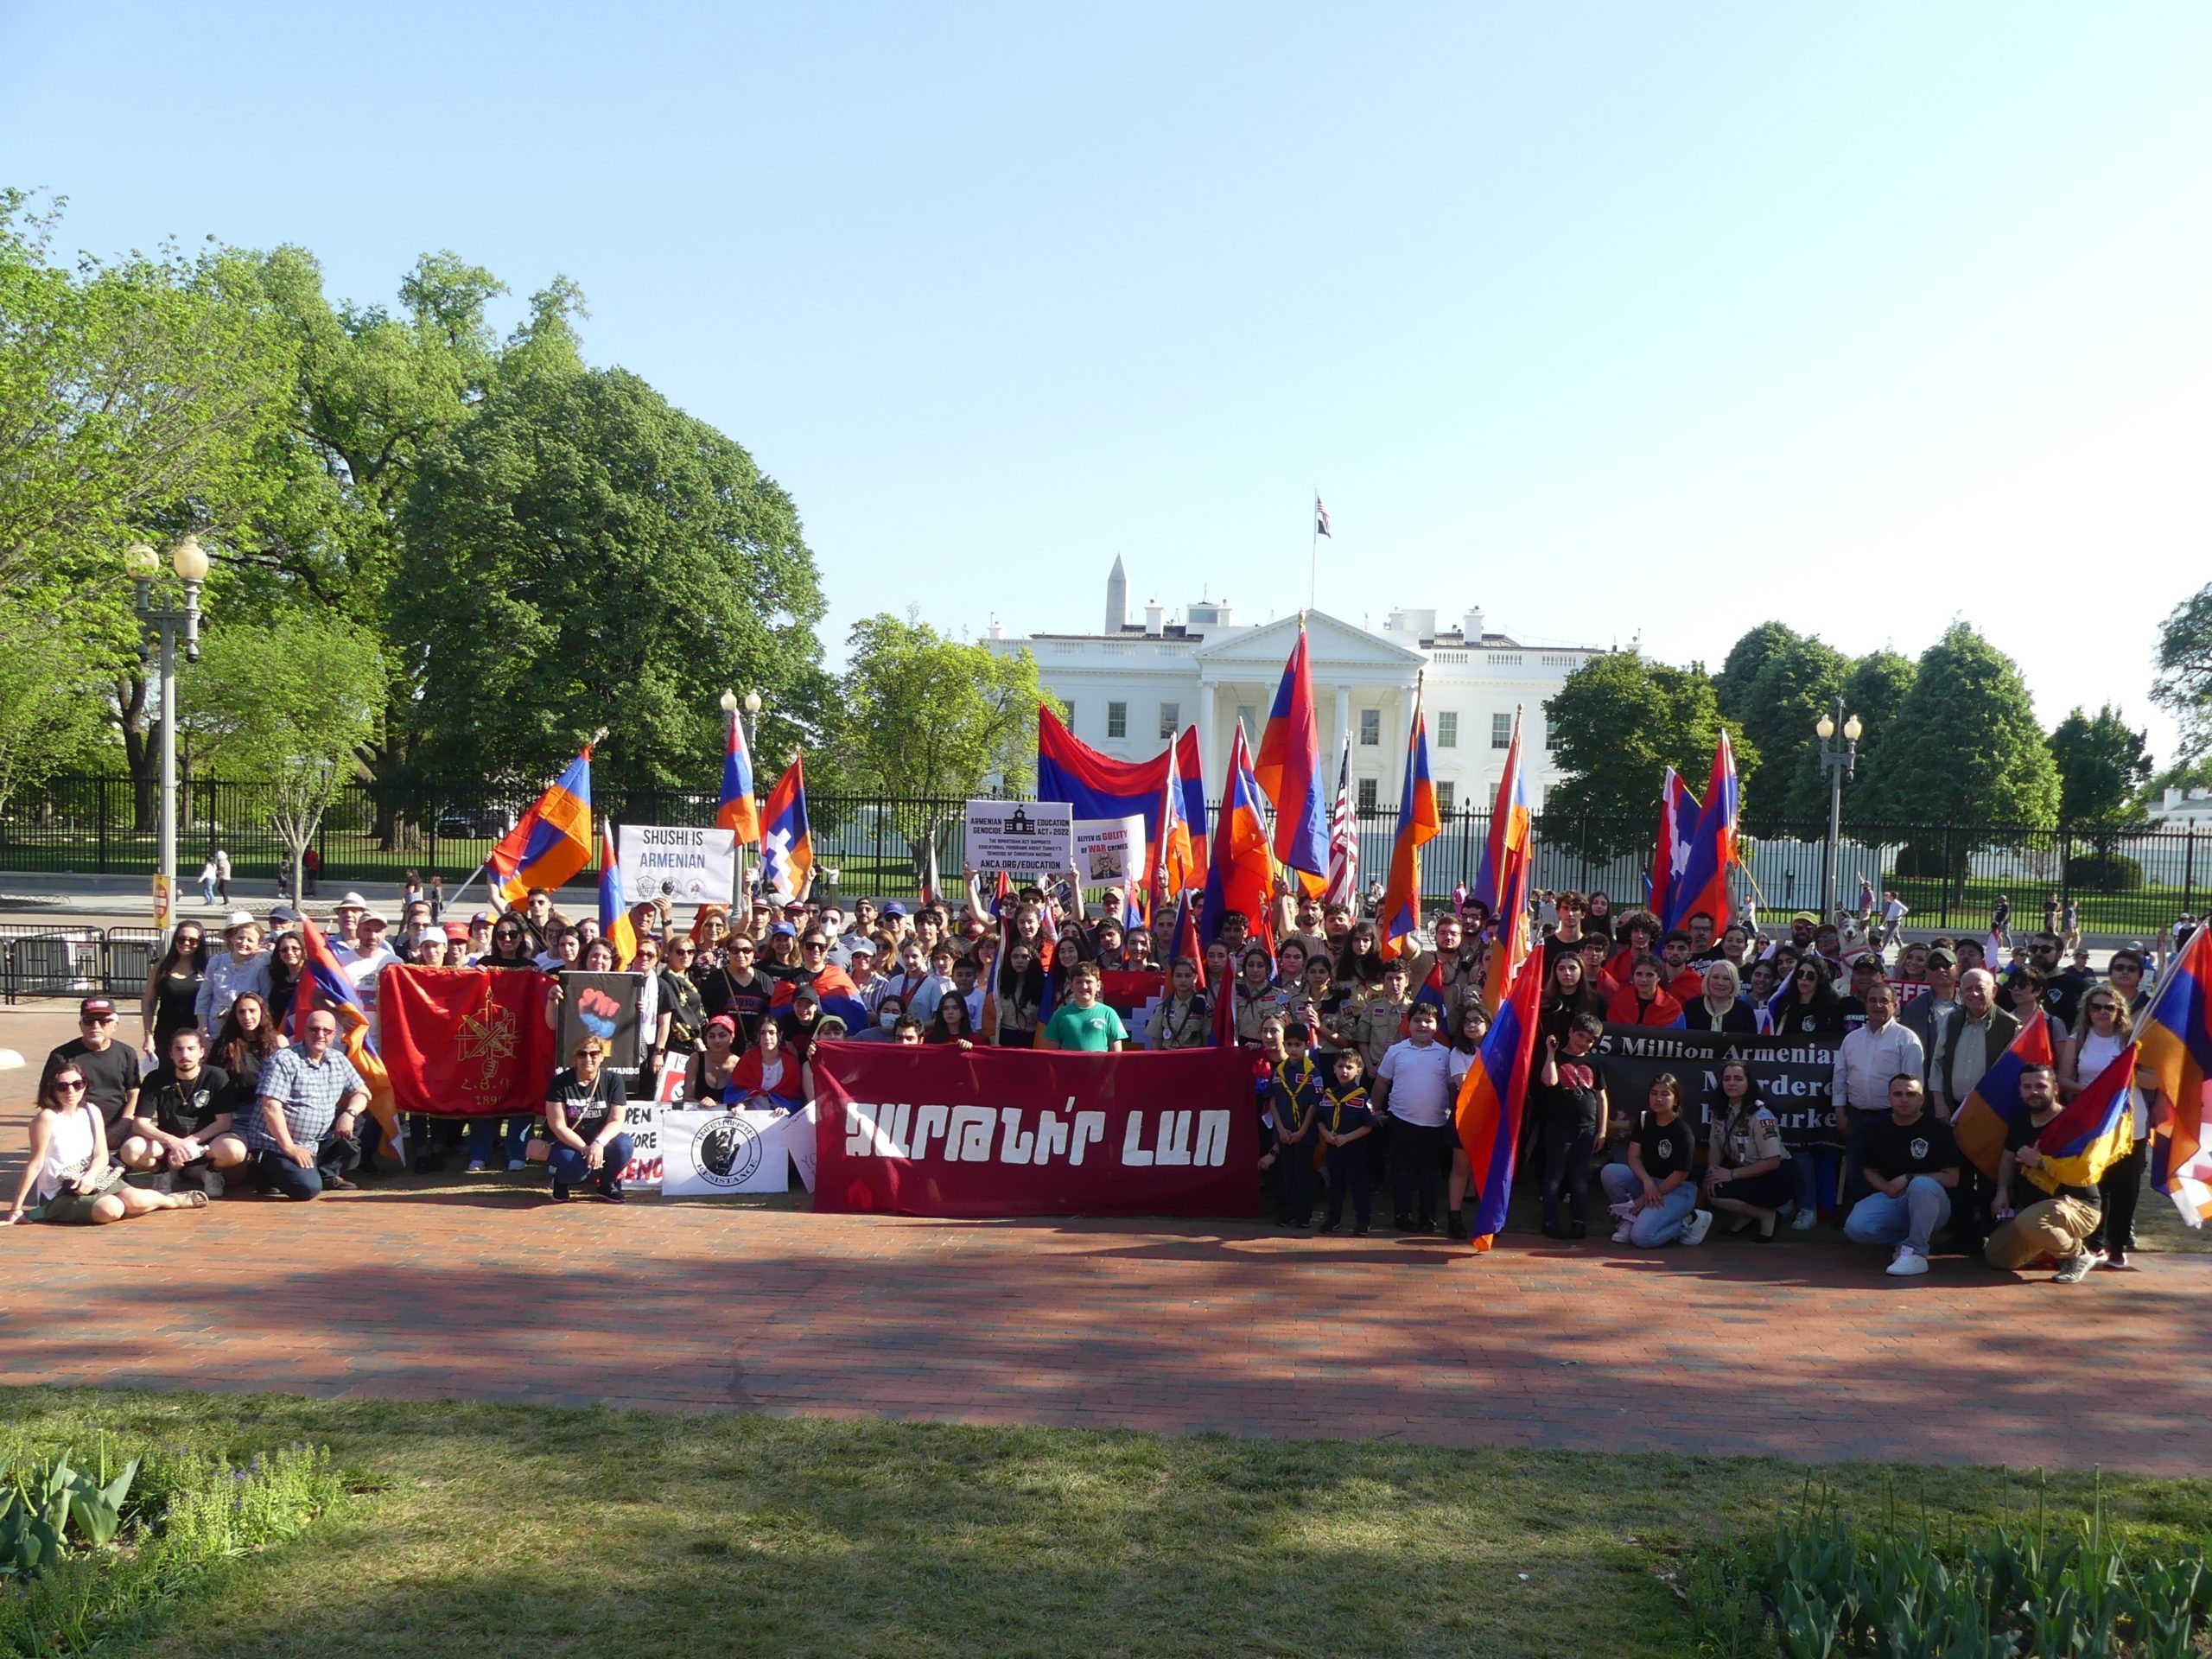 AYF leads Washington, DC March for Justice for the Armenian Genocide